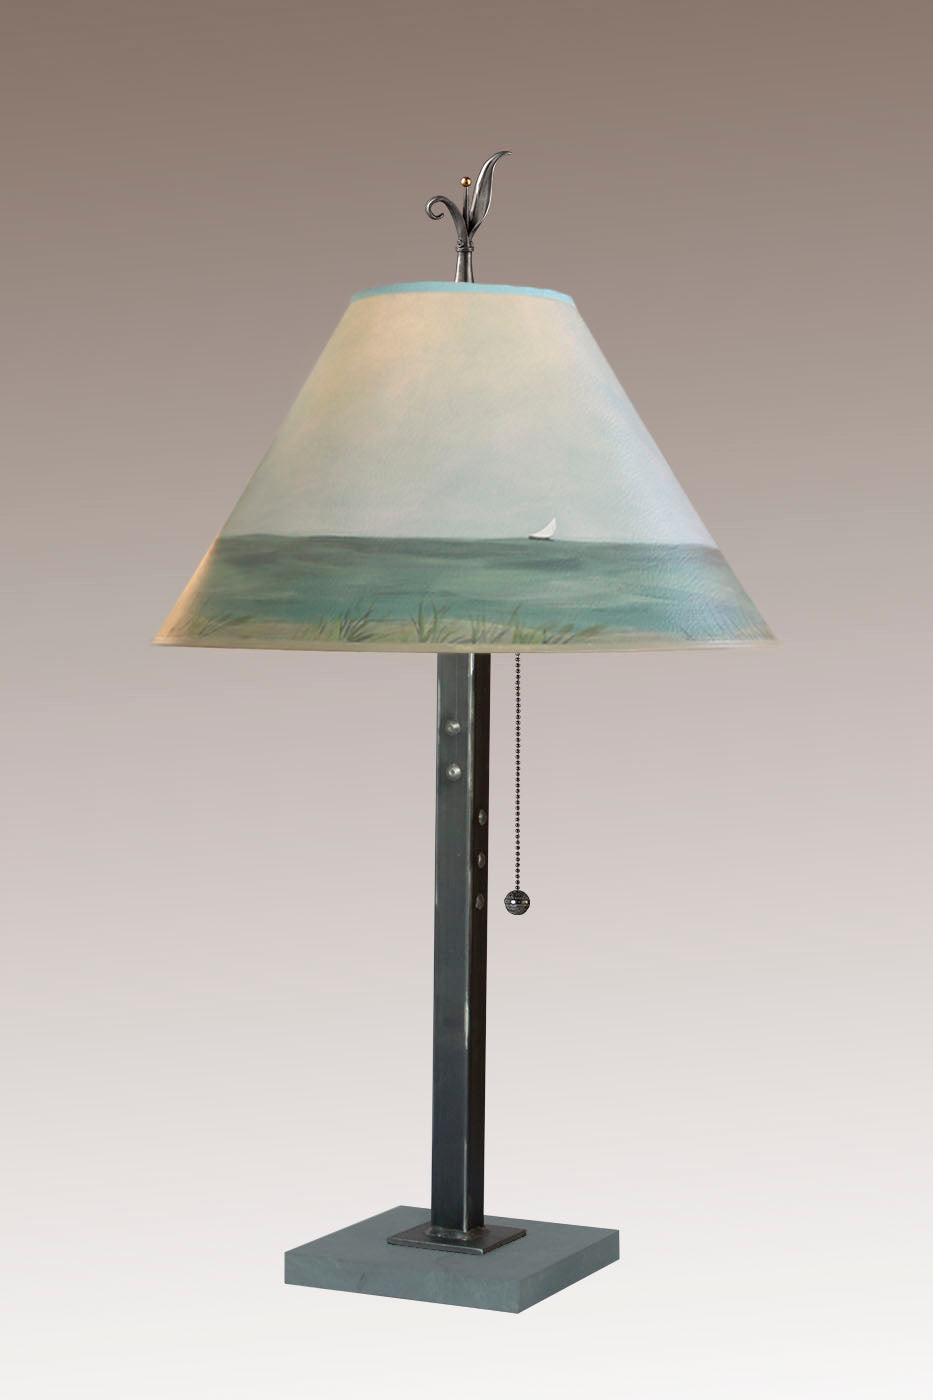 Steel Table Lamp with Medium Conical Shade in Shore